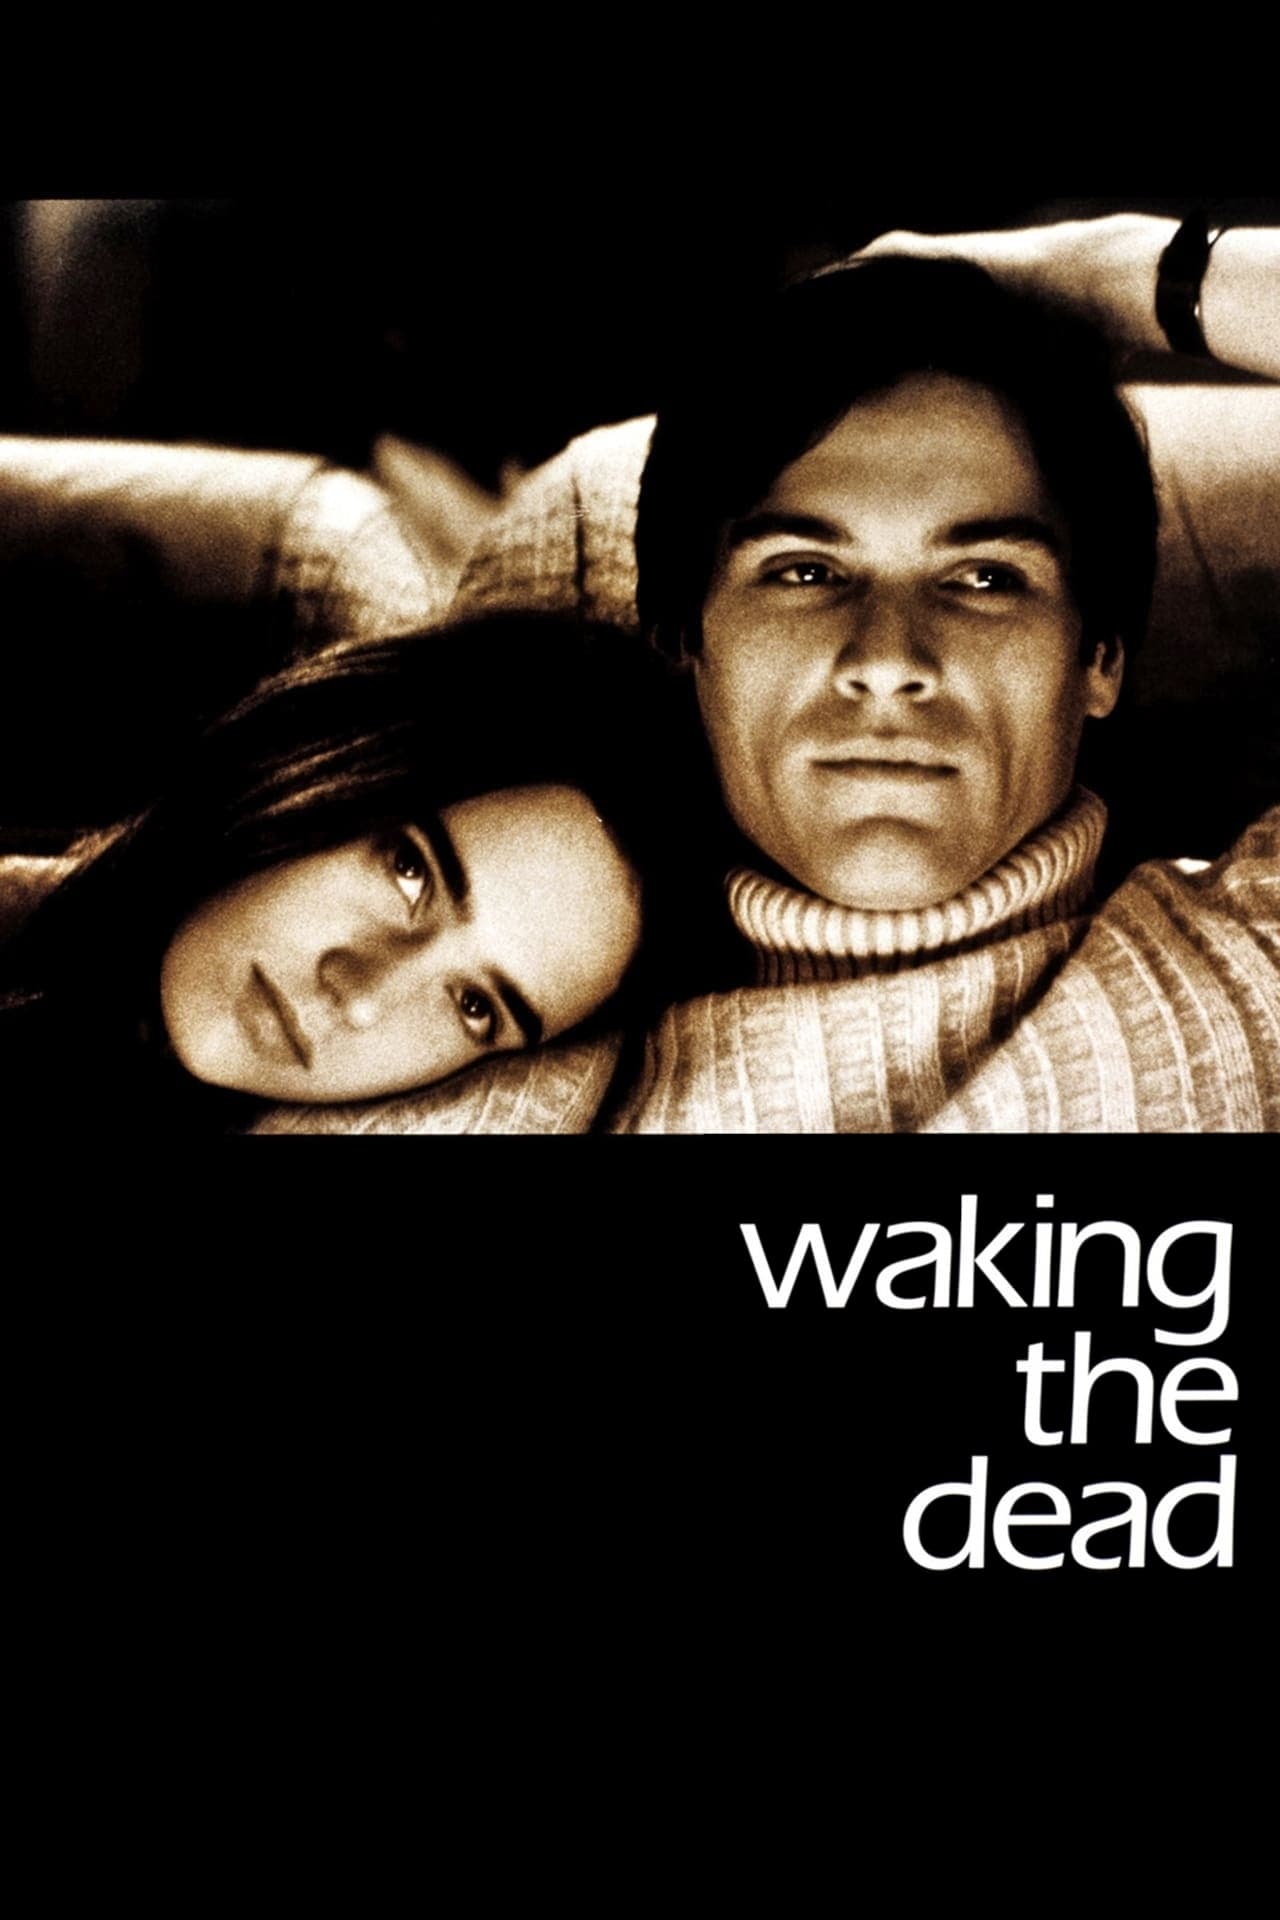 Waking The Dead 00 Movie Where To Watch Streaming Online